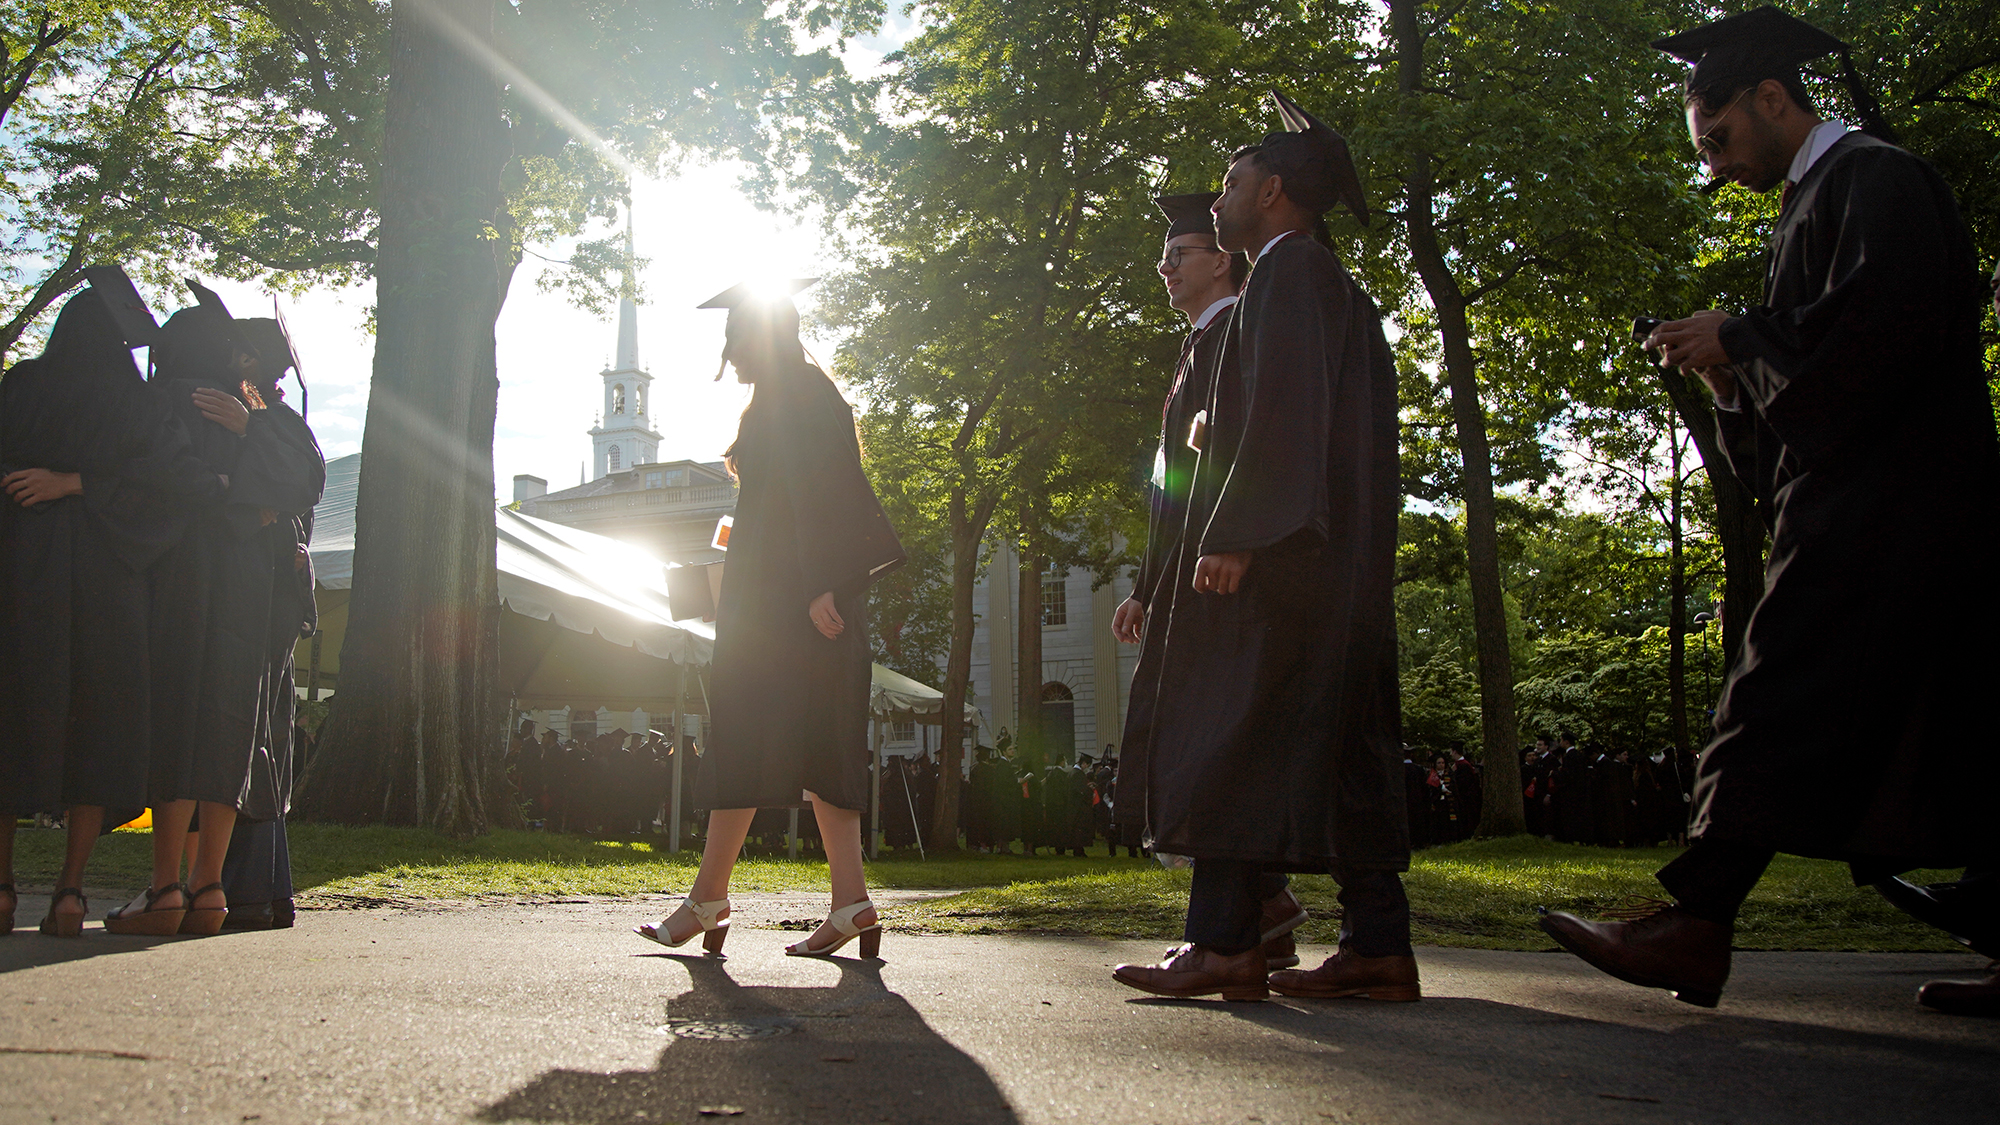 Graduates walk at a Harvard Commencement ceremony held for the classes of 2020 and 2021, May 29, 2022, in Cambridge, Massachusetts.